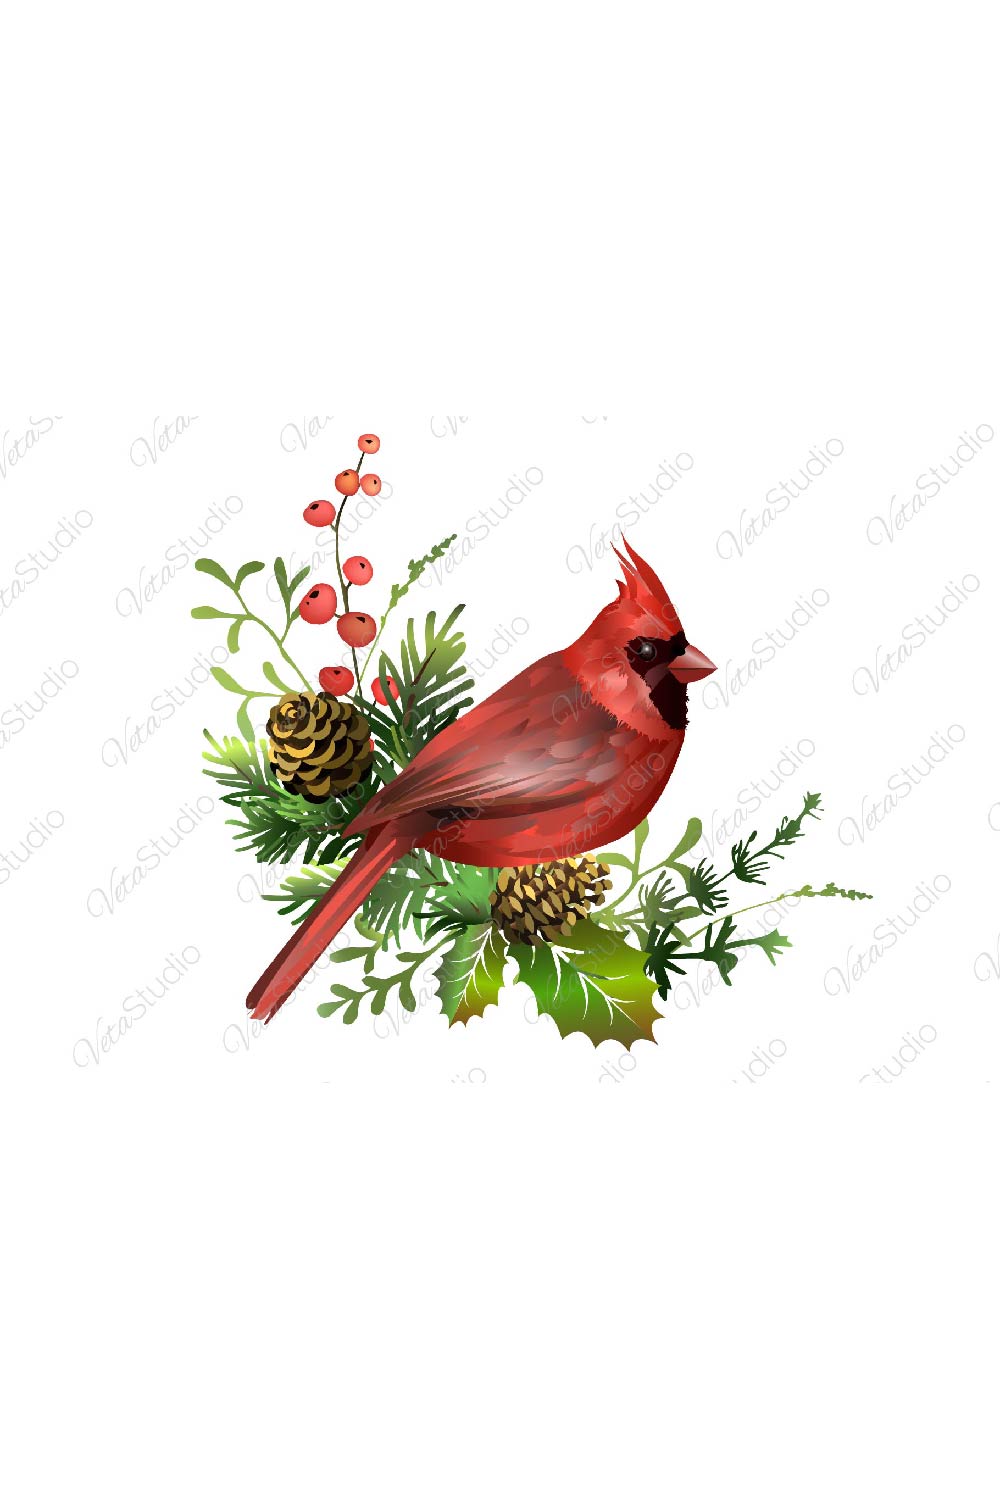 Red Cardinal Bird With Pine Branch - Pinterest image preview.